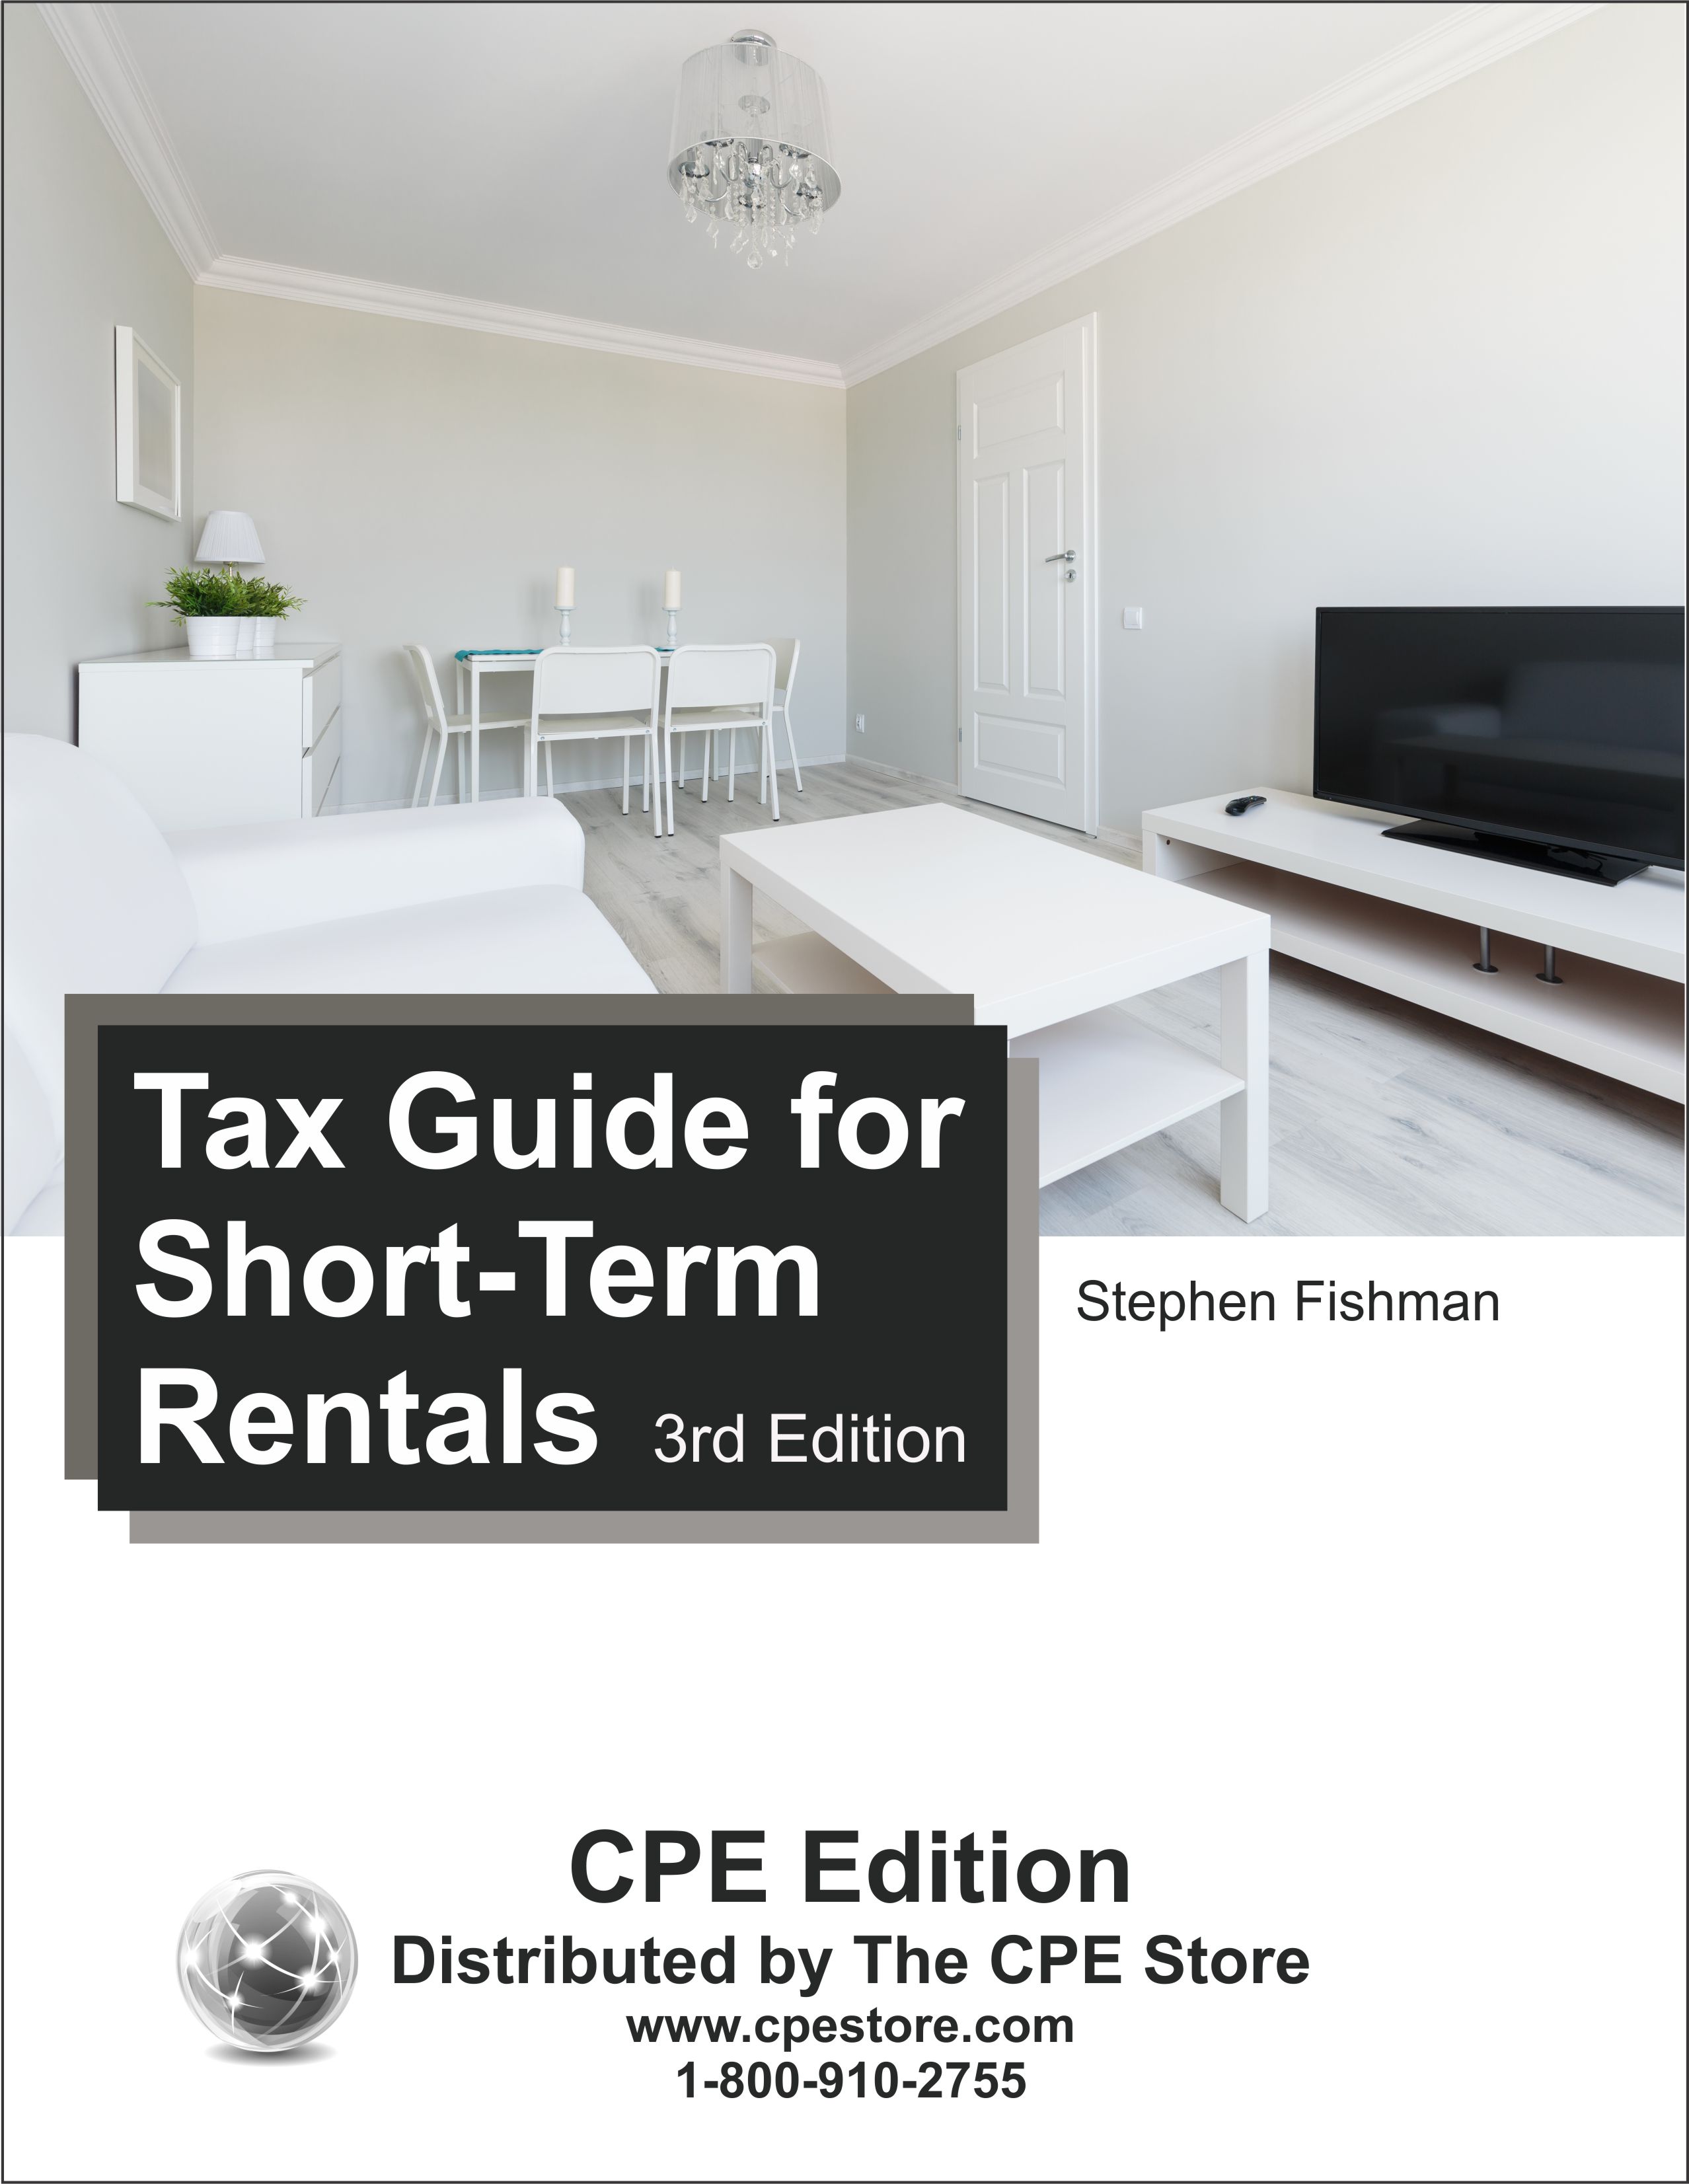 Tax Guide for Short-Term Rentals